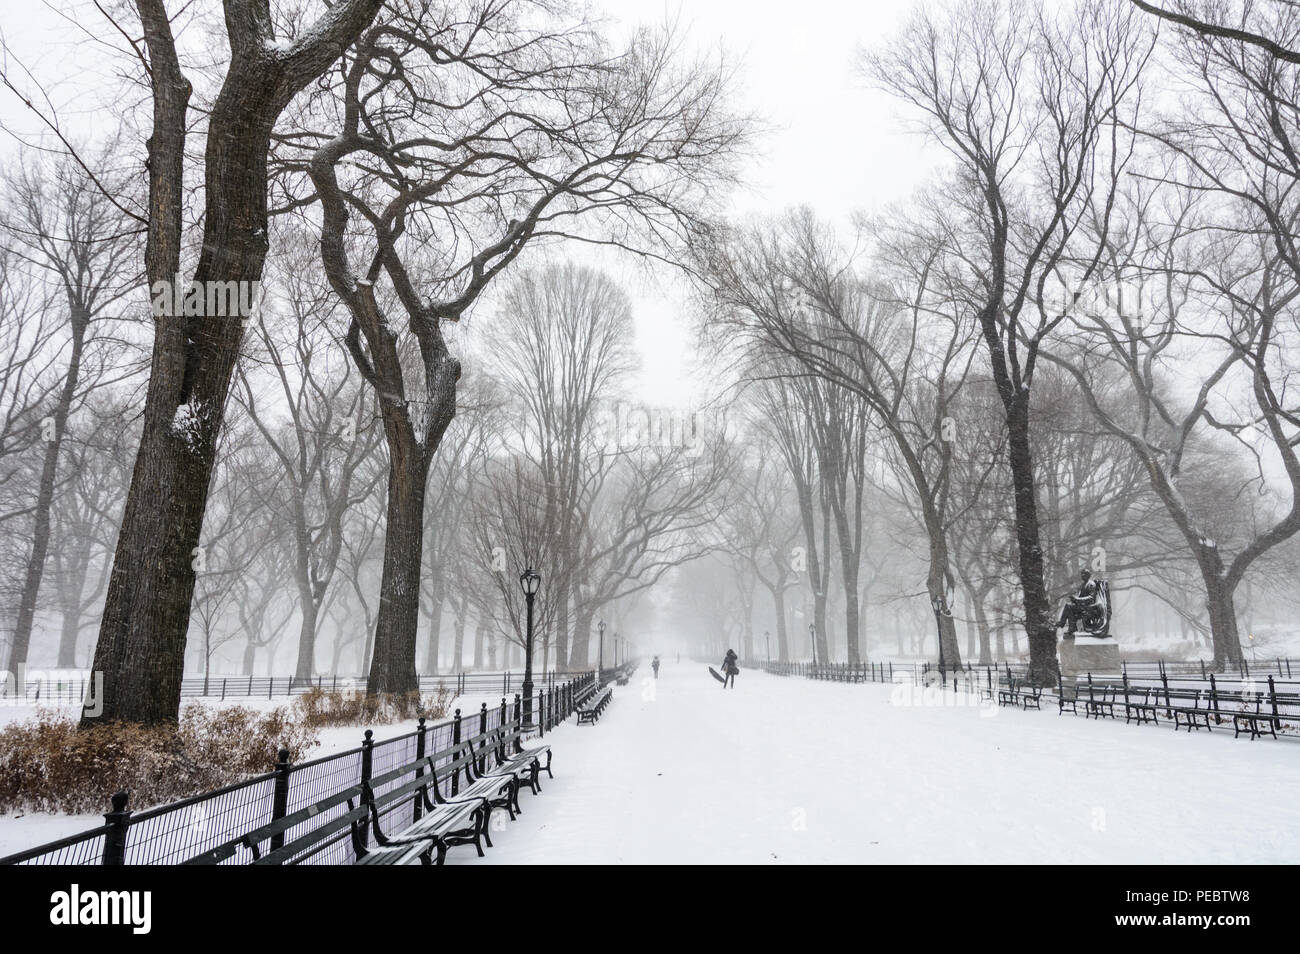 A woman holds her umbrella along the snow covered Mall in Central Park after Winter Storm Grayson in January 2018. Stock Photo